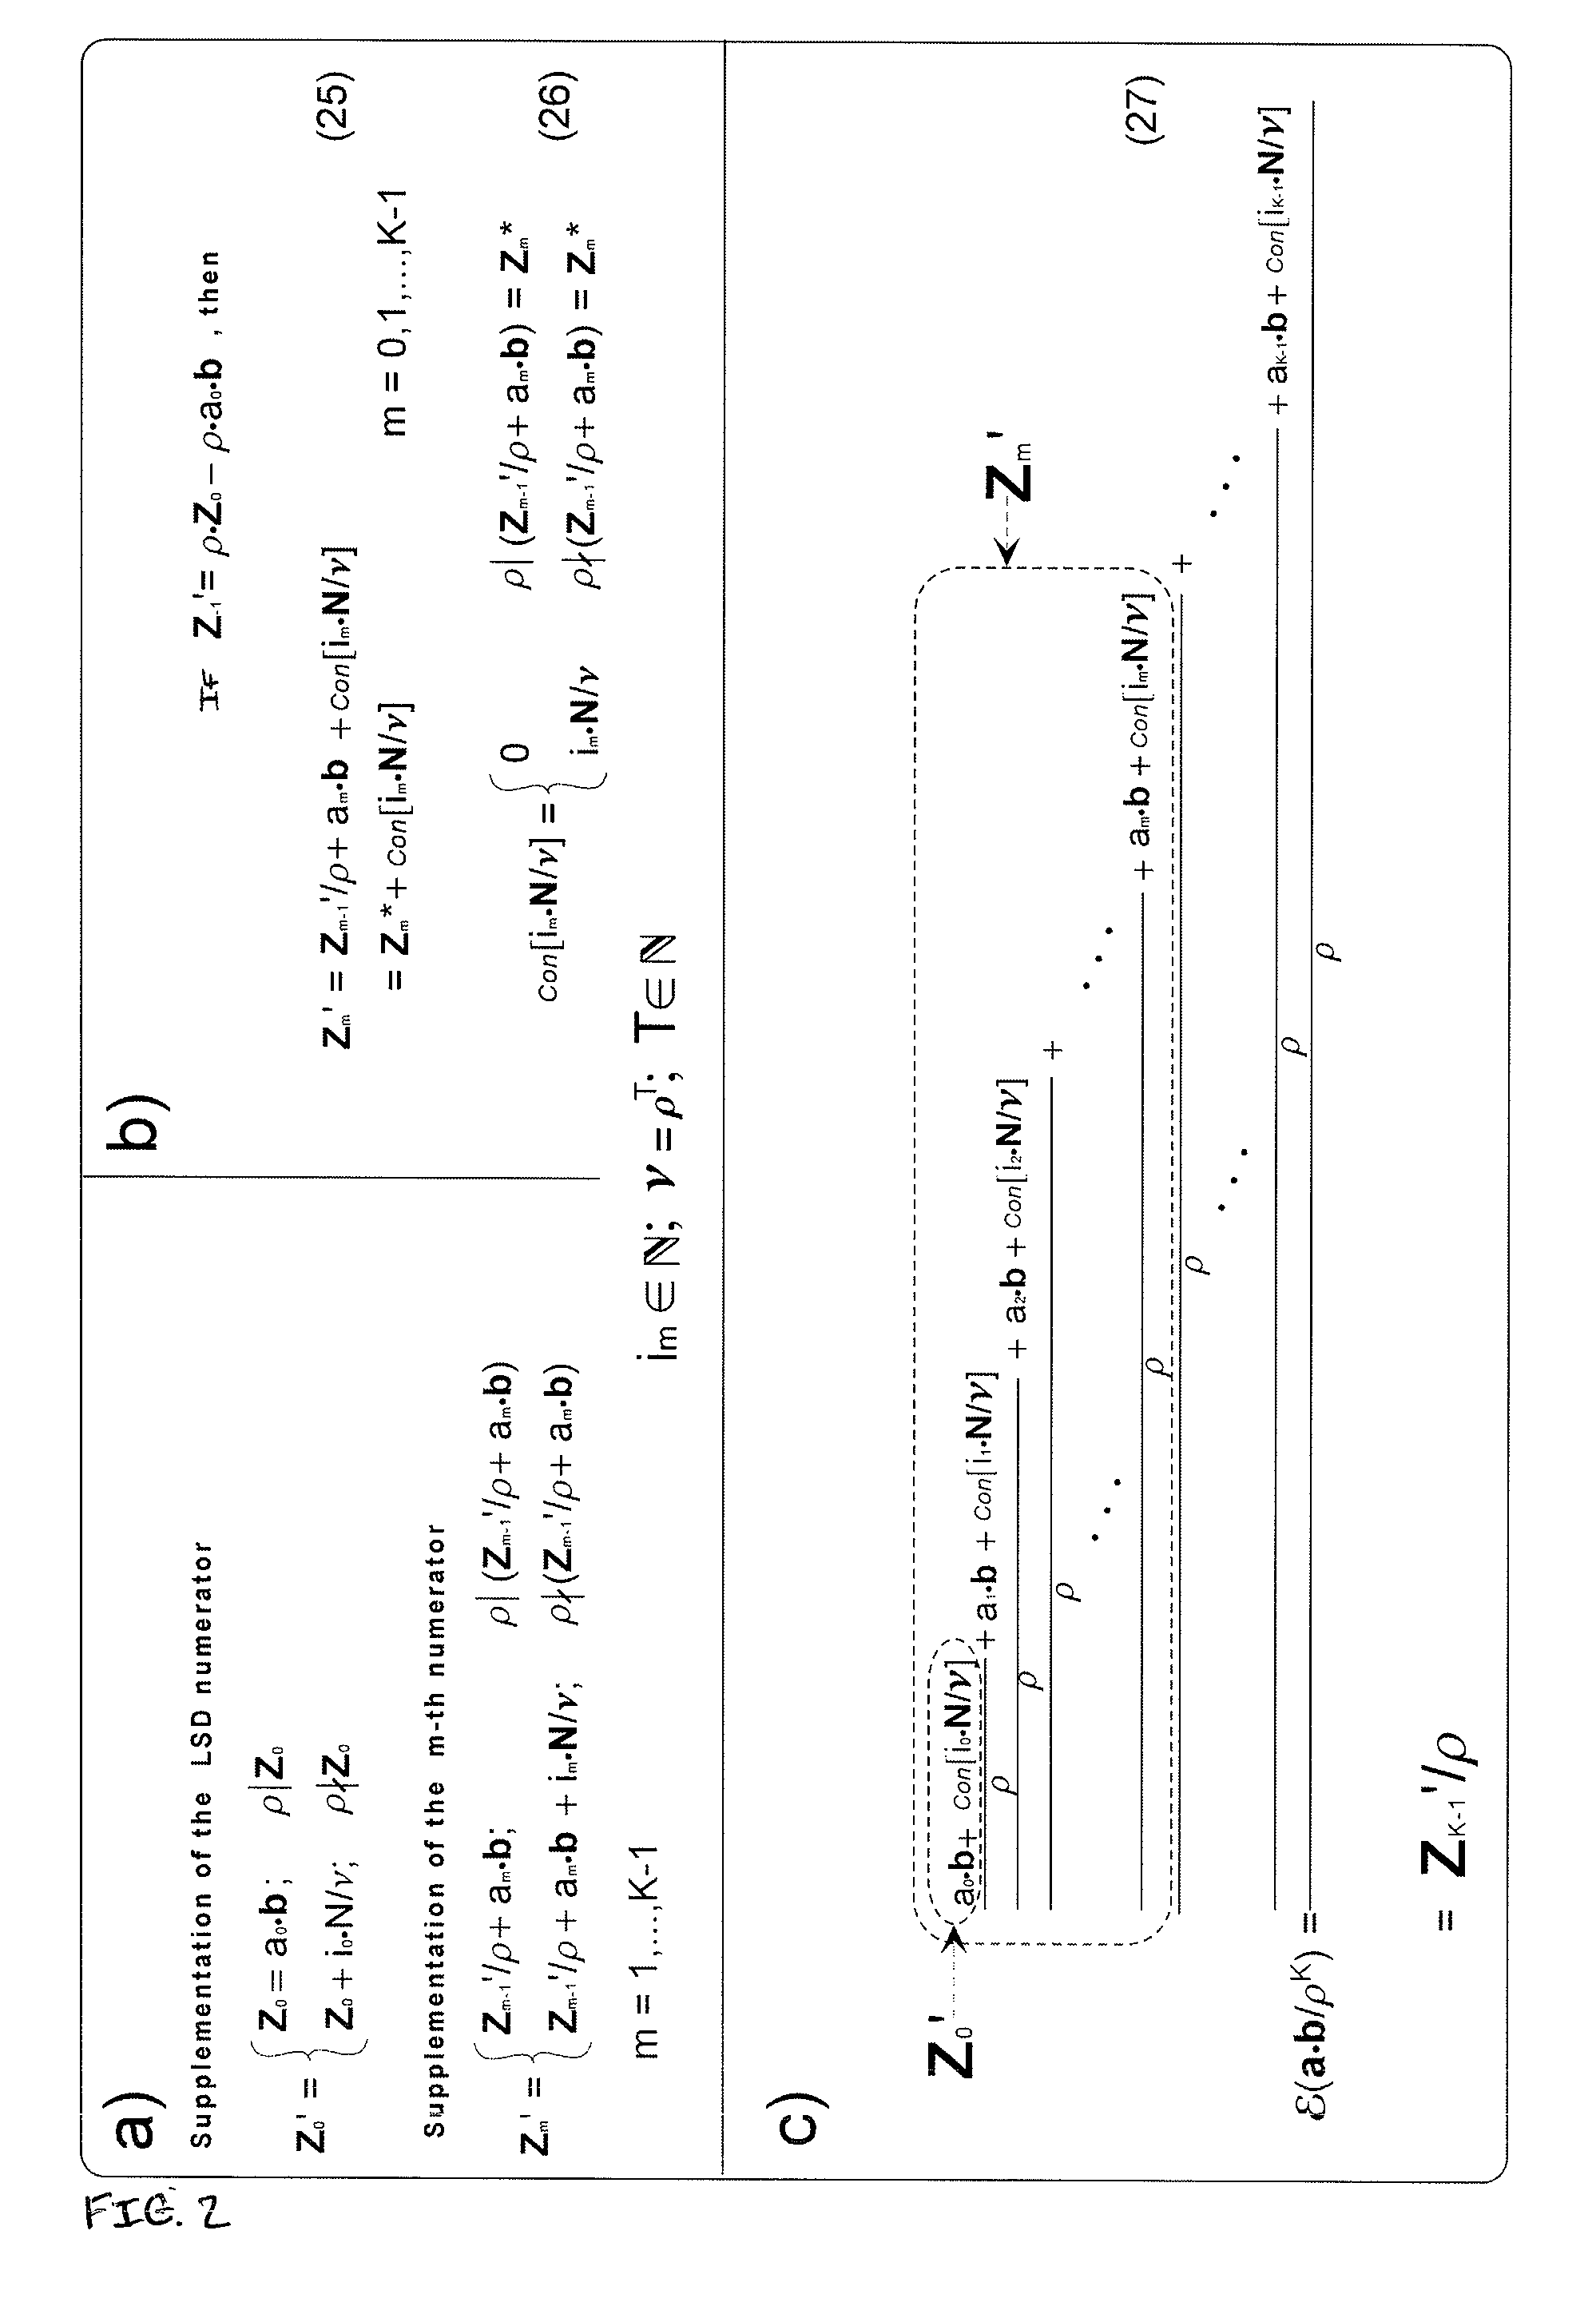 Circuits for modular arithmetic based on the complementation of continued fractions